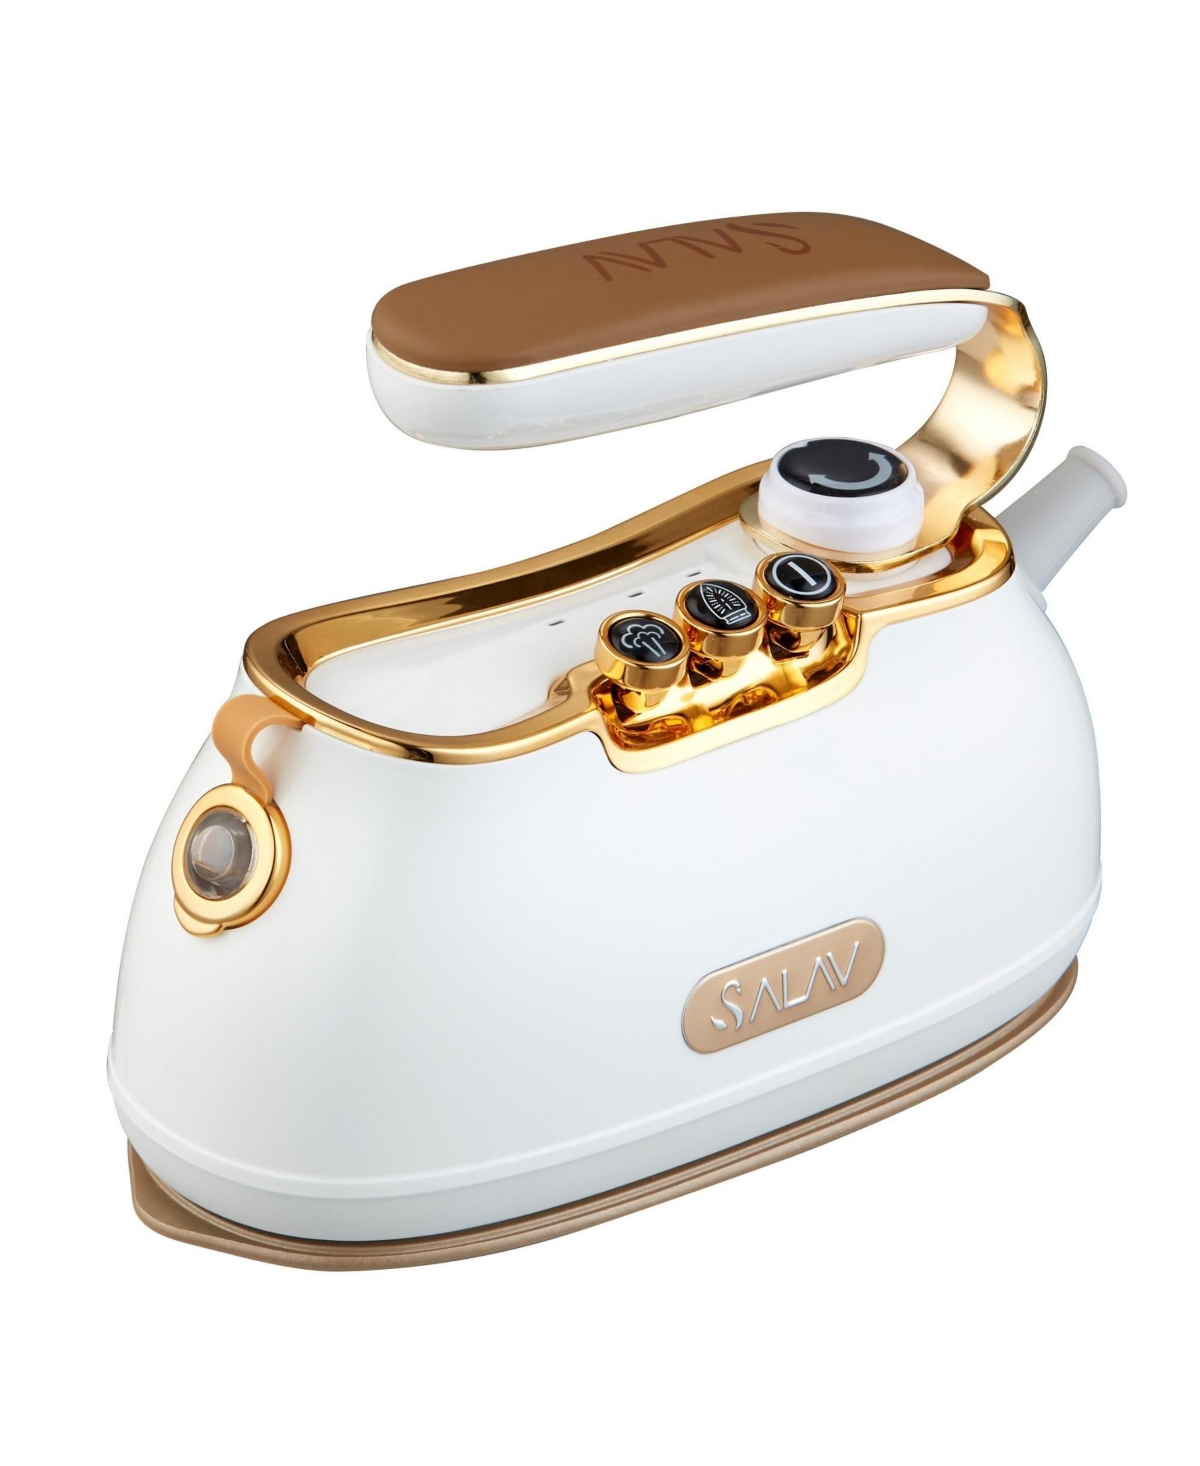 Salav Is-900 Retro Edition Duopress Steamer And Iron In Pearl